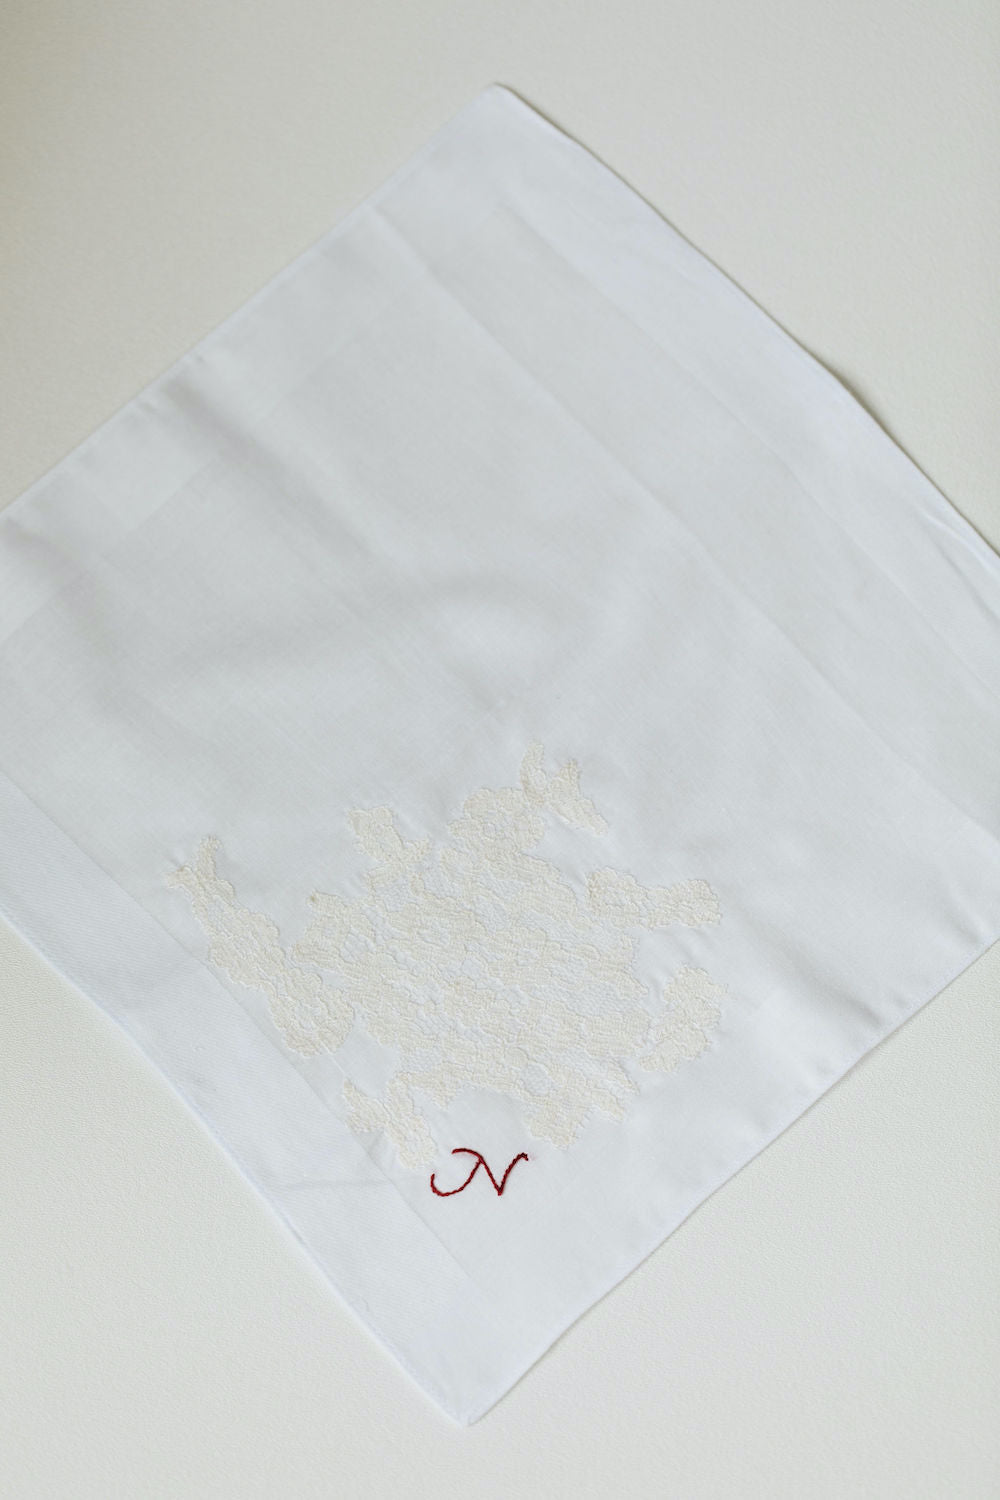 using great grandmother's wedding dress lace on two wedding handkerchiefs personalized with monogram embroidery - handmade wedding heirlooms from The Garter Girl